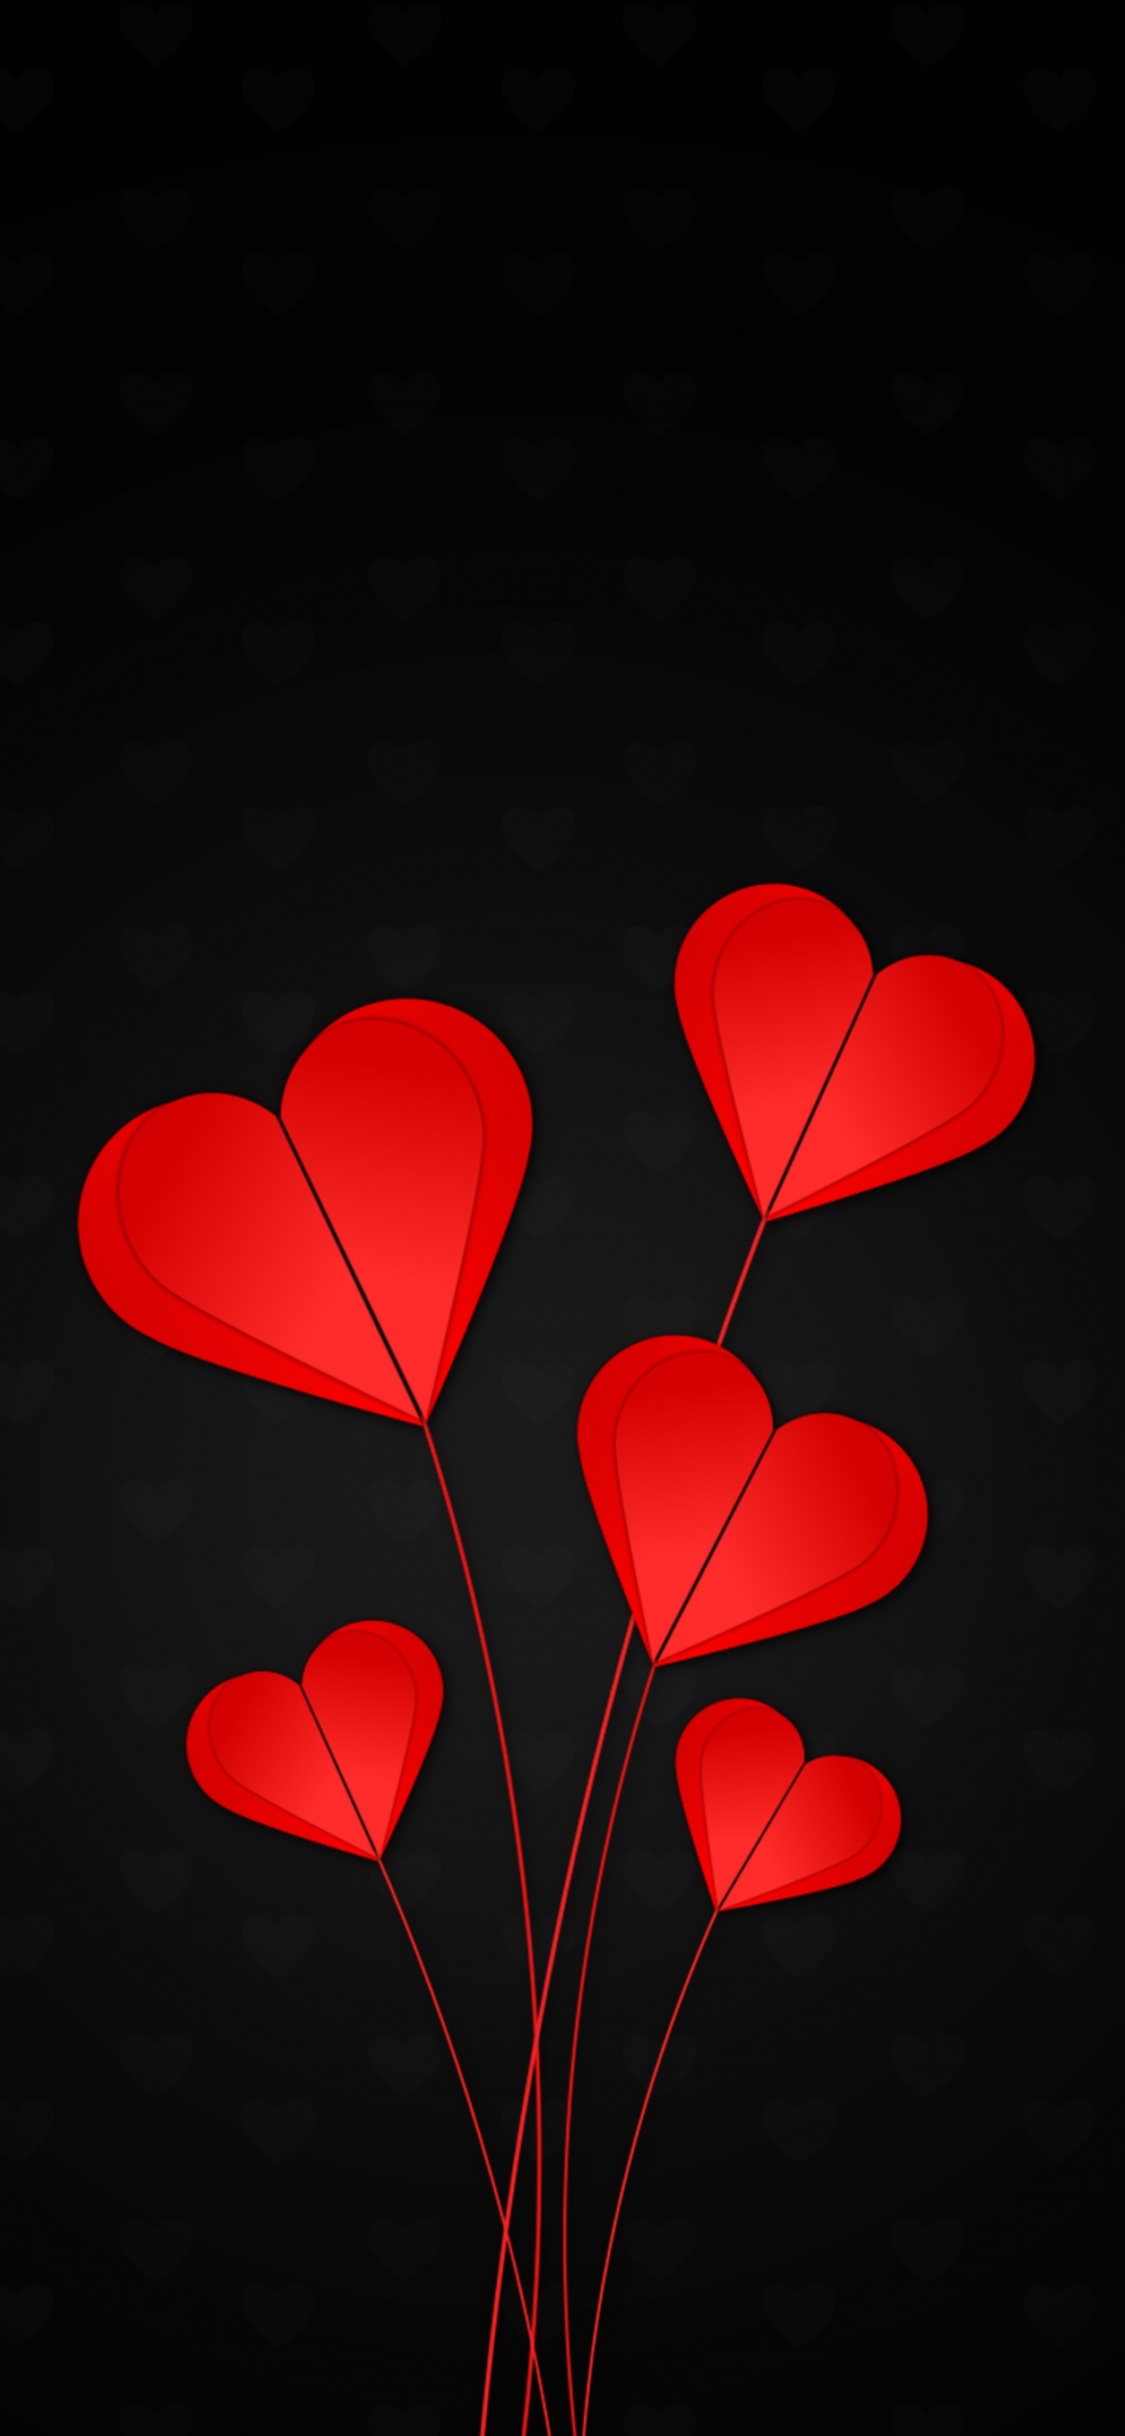 Heart, Red, Petal, Love, Valentines Day. Wallpaper in 1125x2436 Resolution